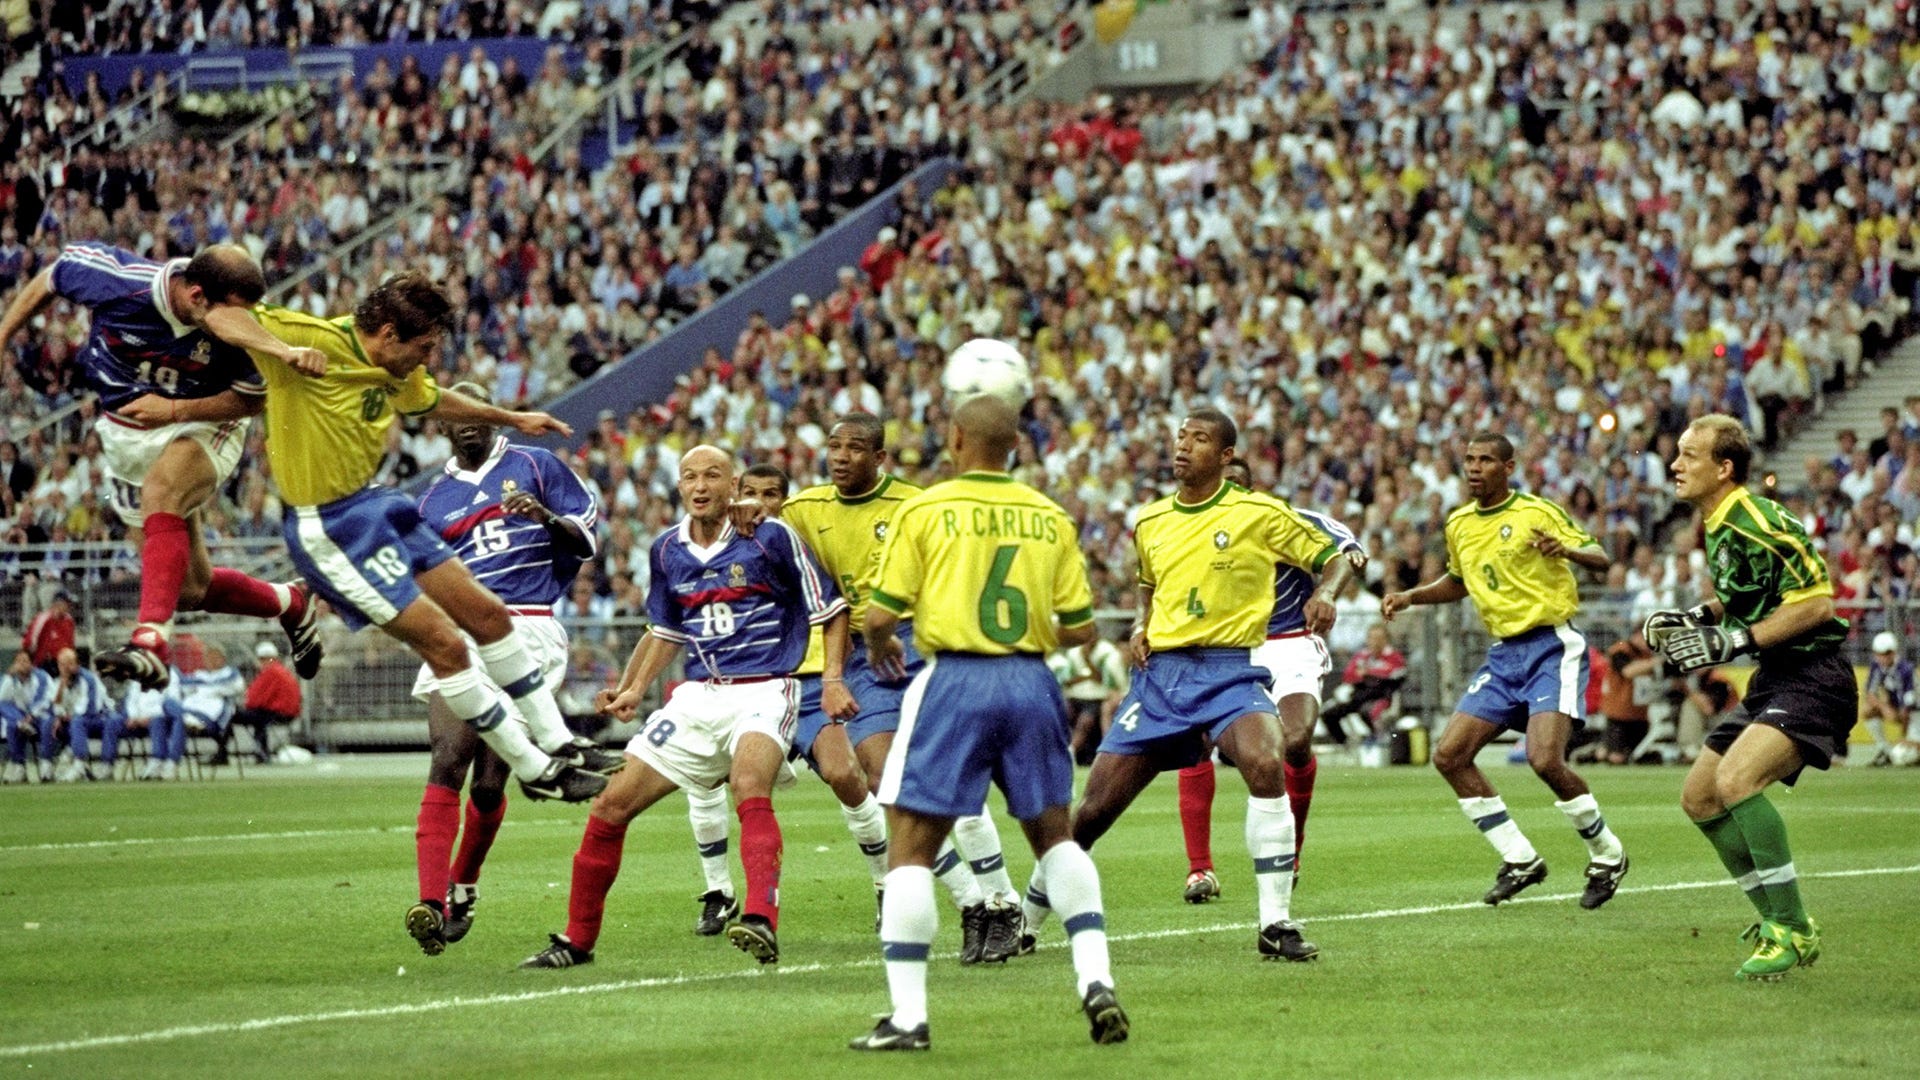 FIFA Rewind: Watch Brazil versus France from World Cup 1998 in